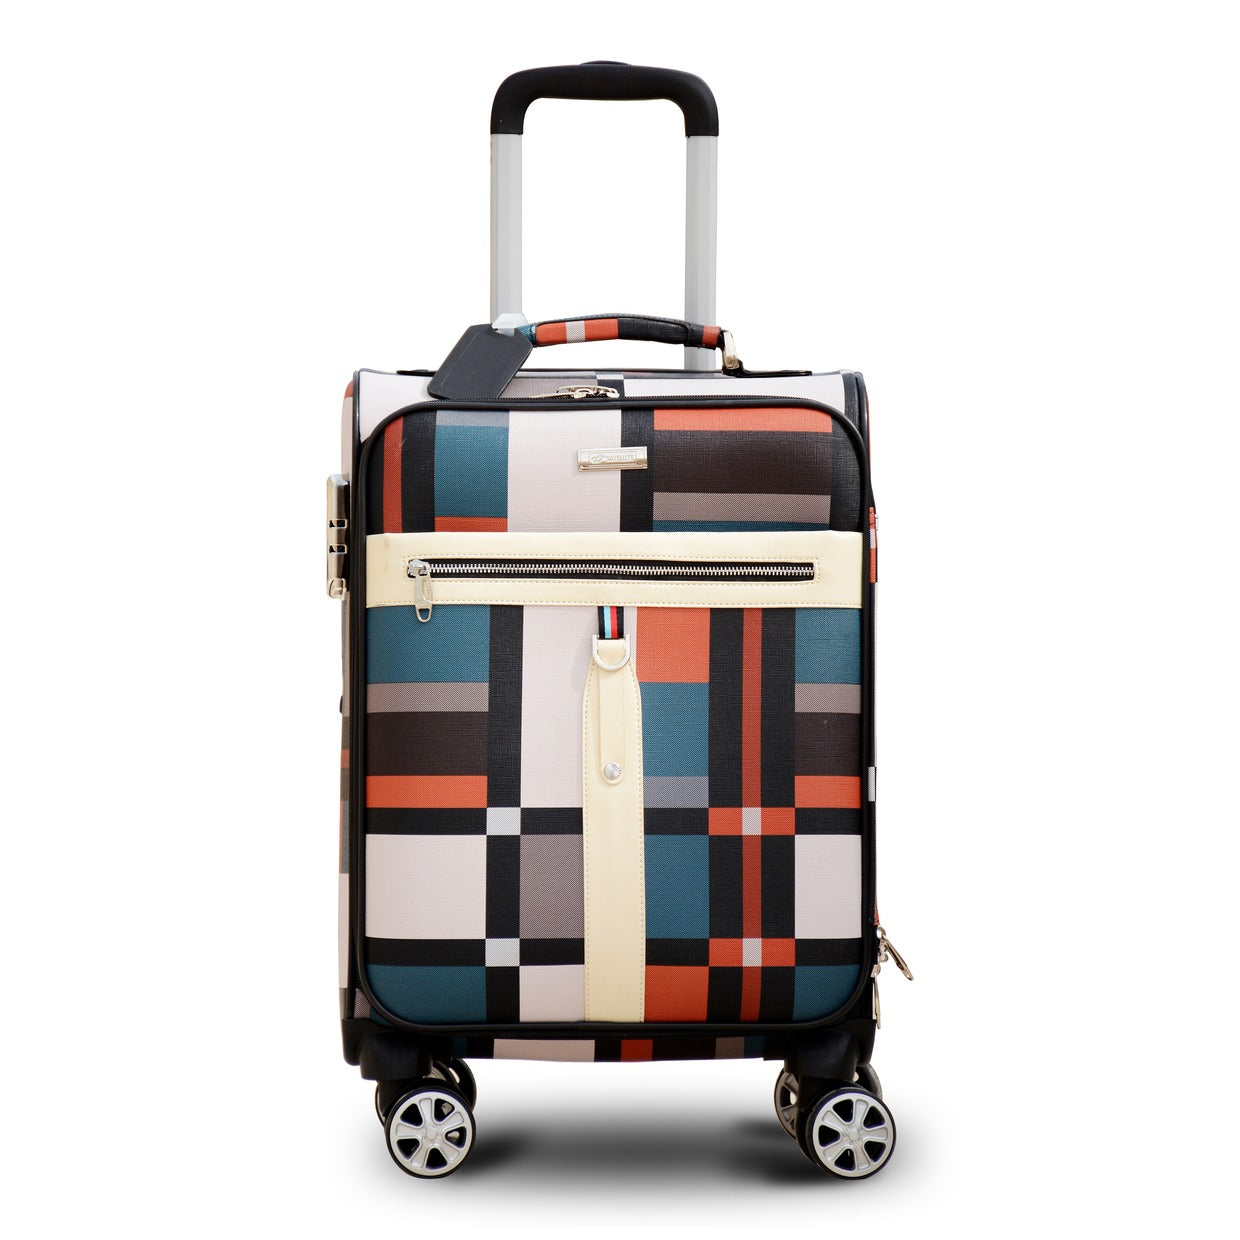 32" PU Check Type Luggage Lightweight Soft Material Trolley Bag Zaappy.com